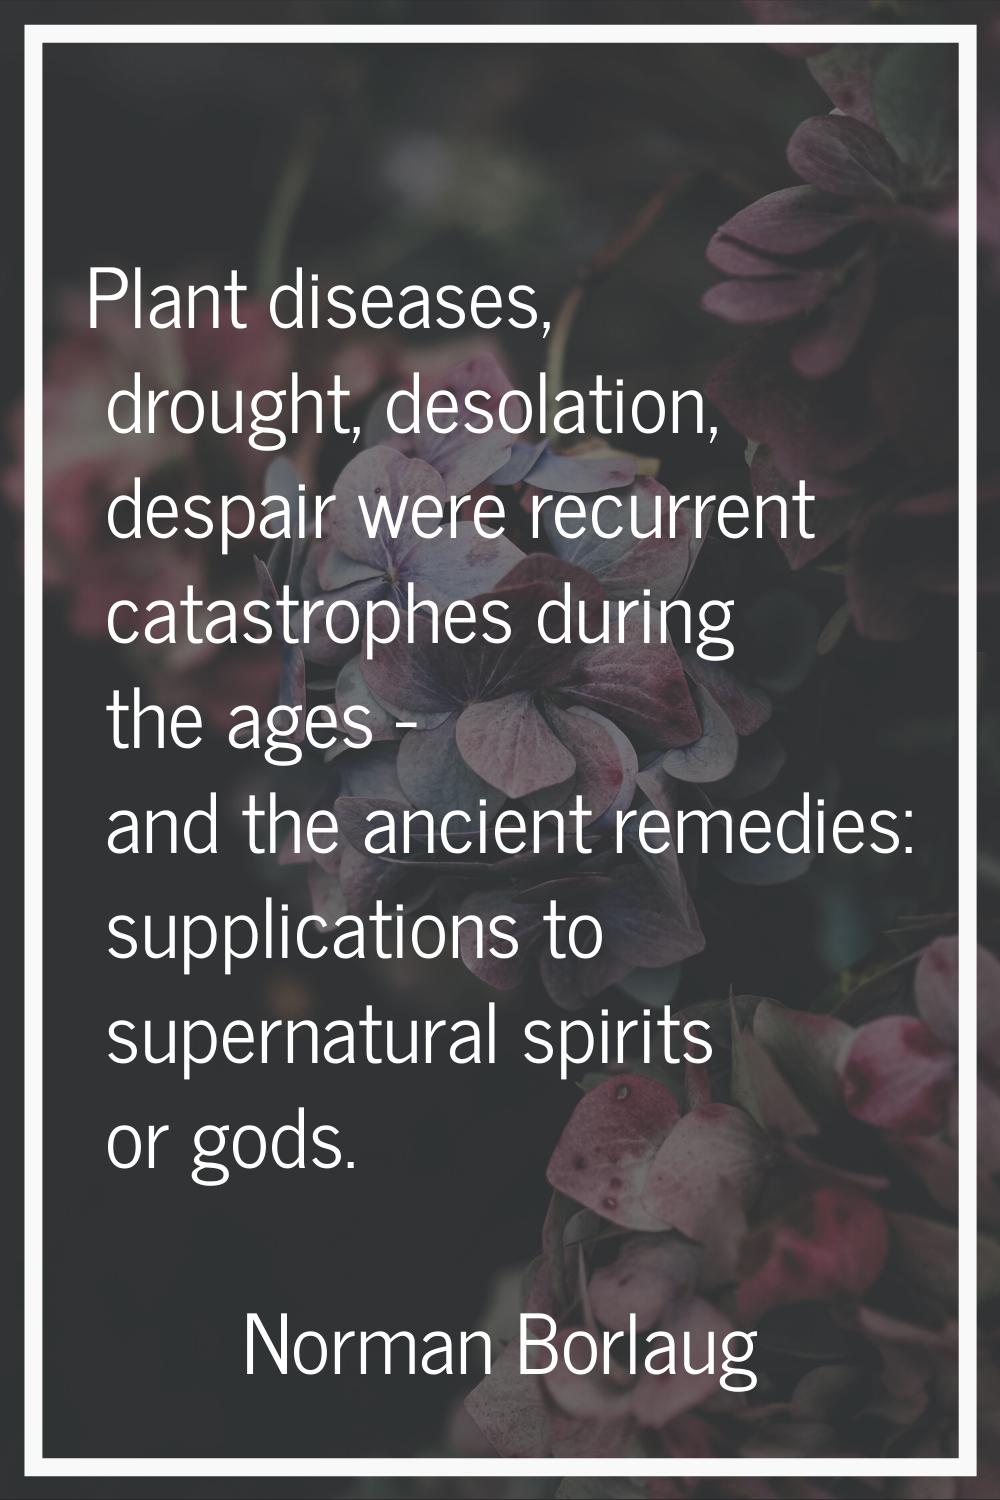 Plant diseases, drought, desolation, despair were recurrent catastrophes during the ages - and the 